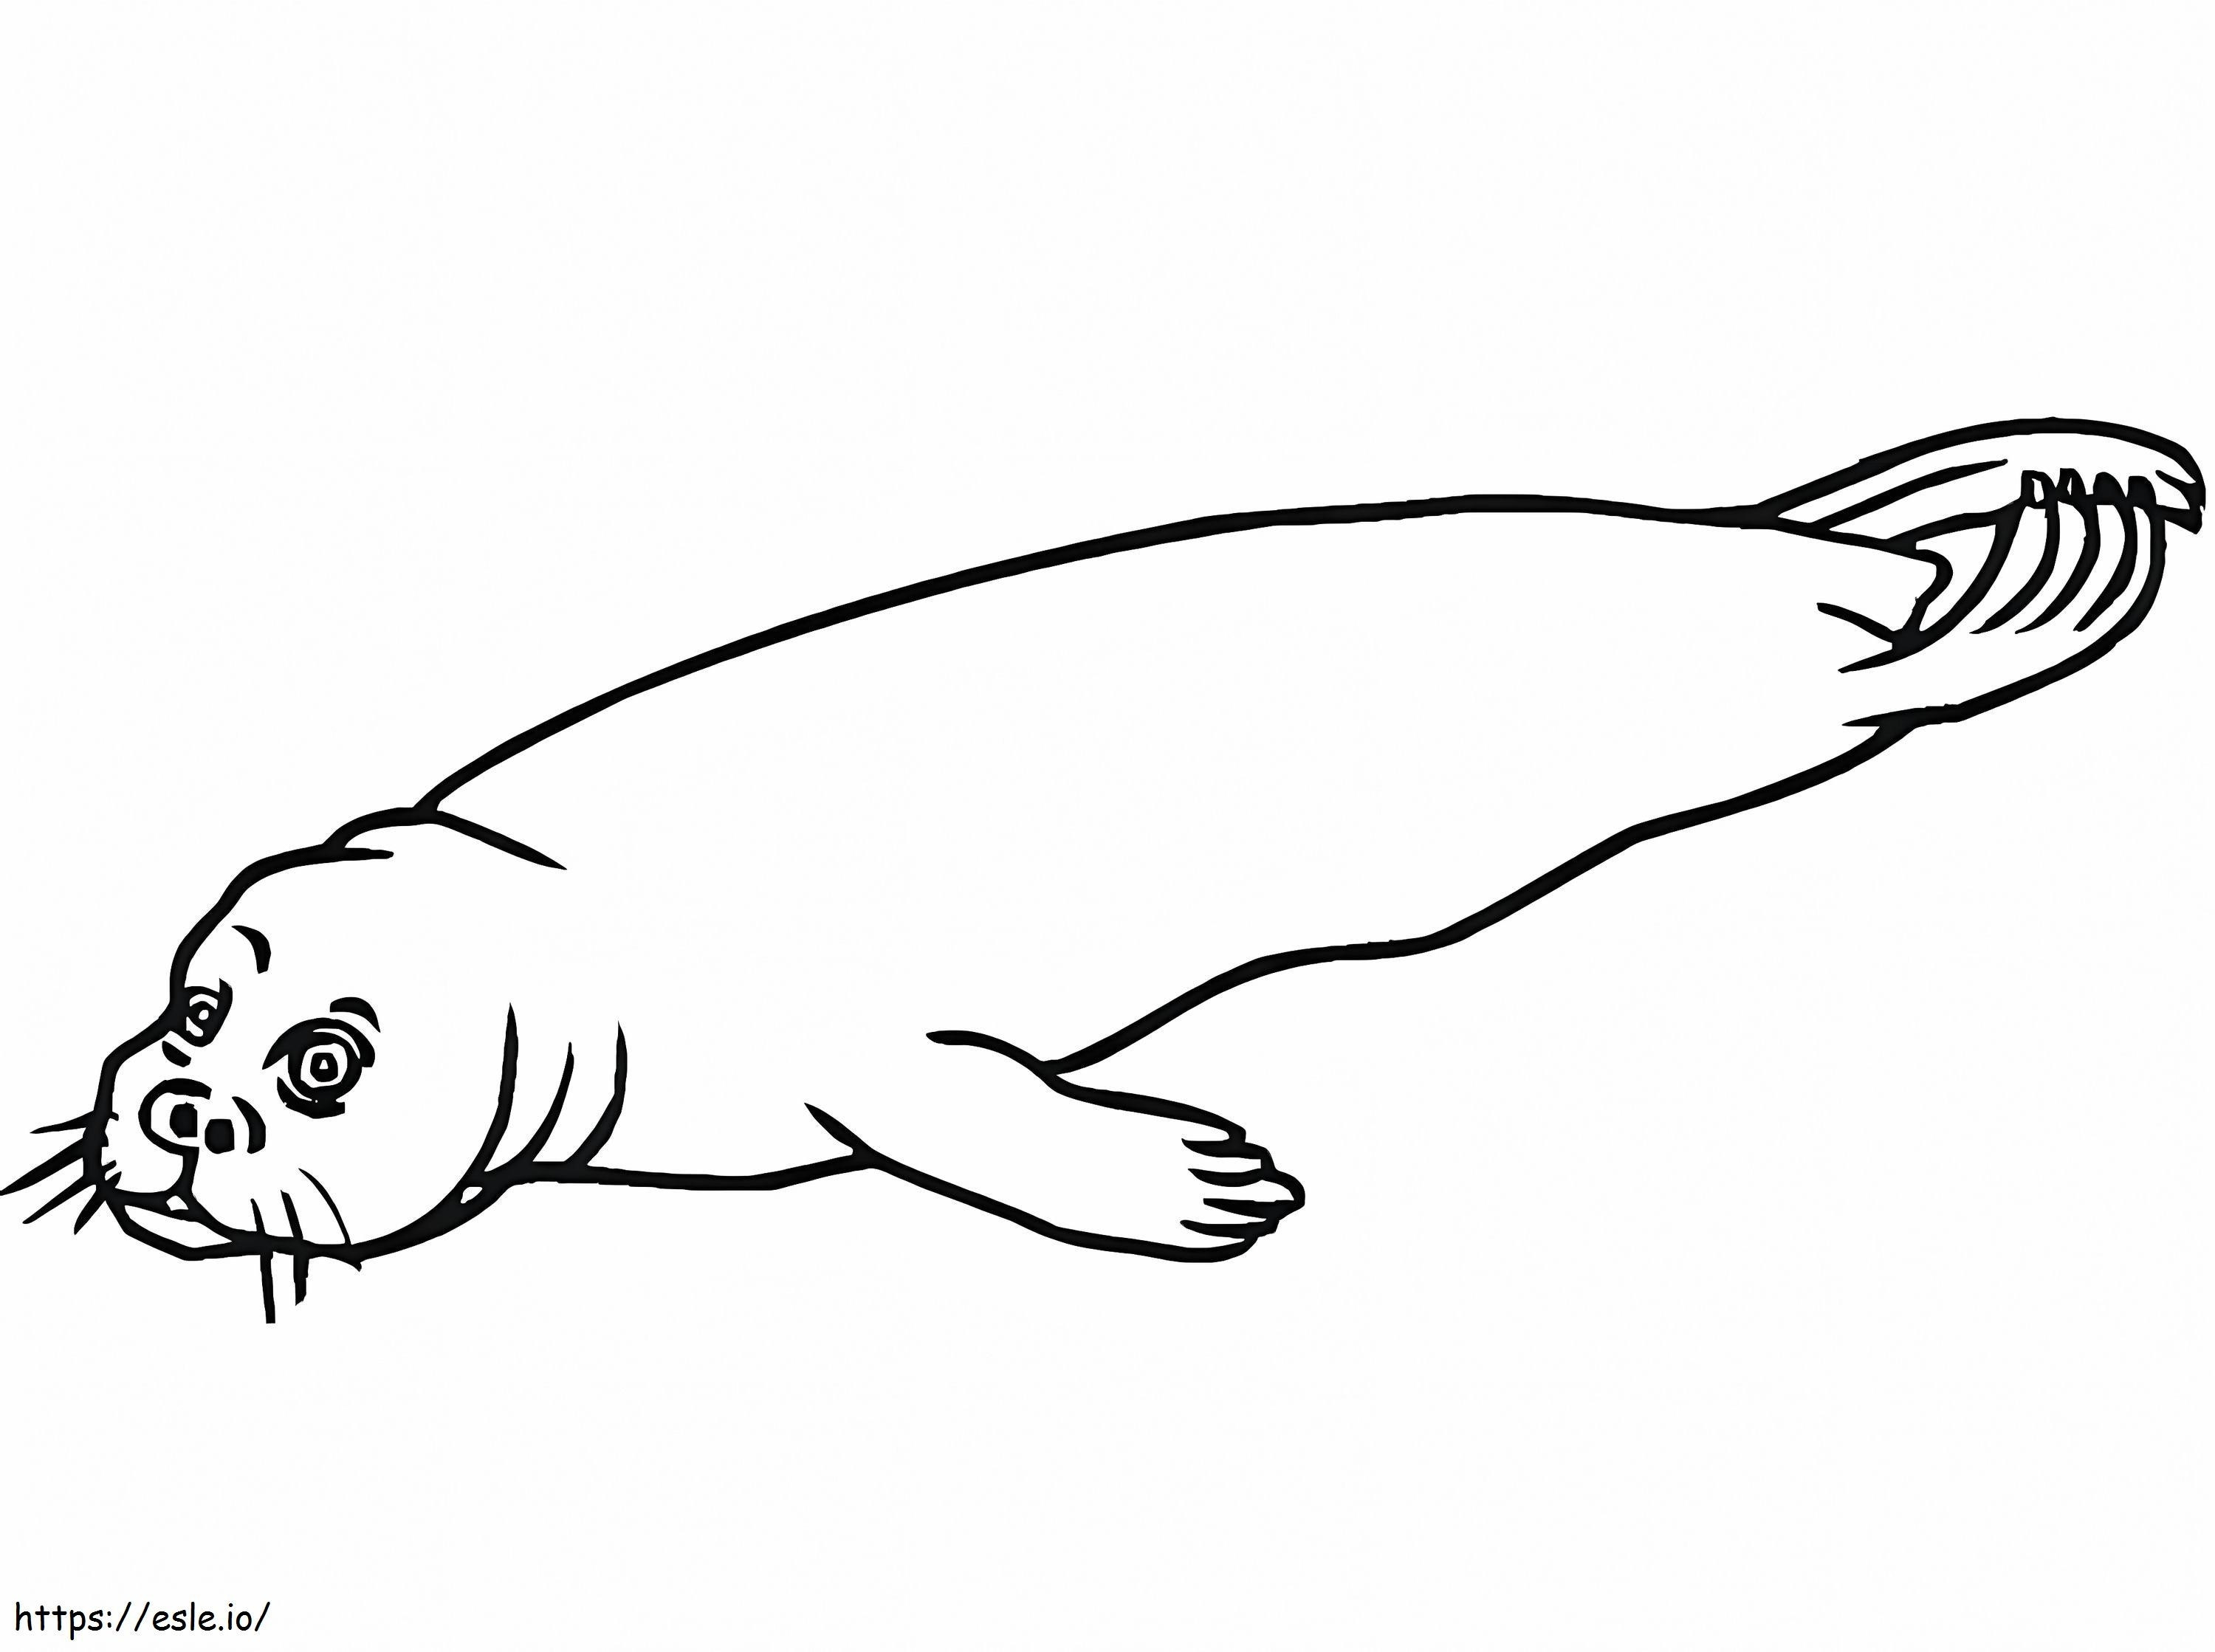 Normal Port Seal coloring page